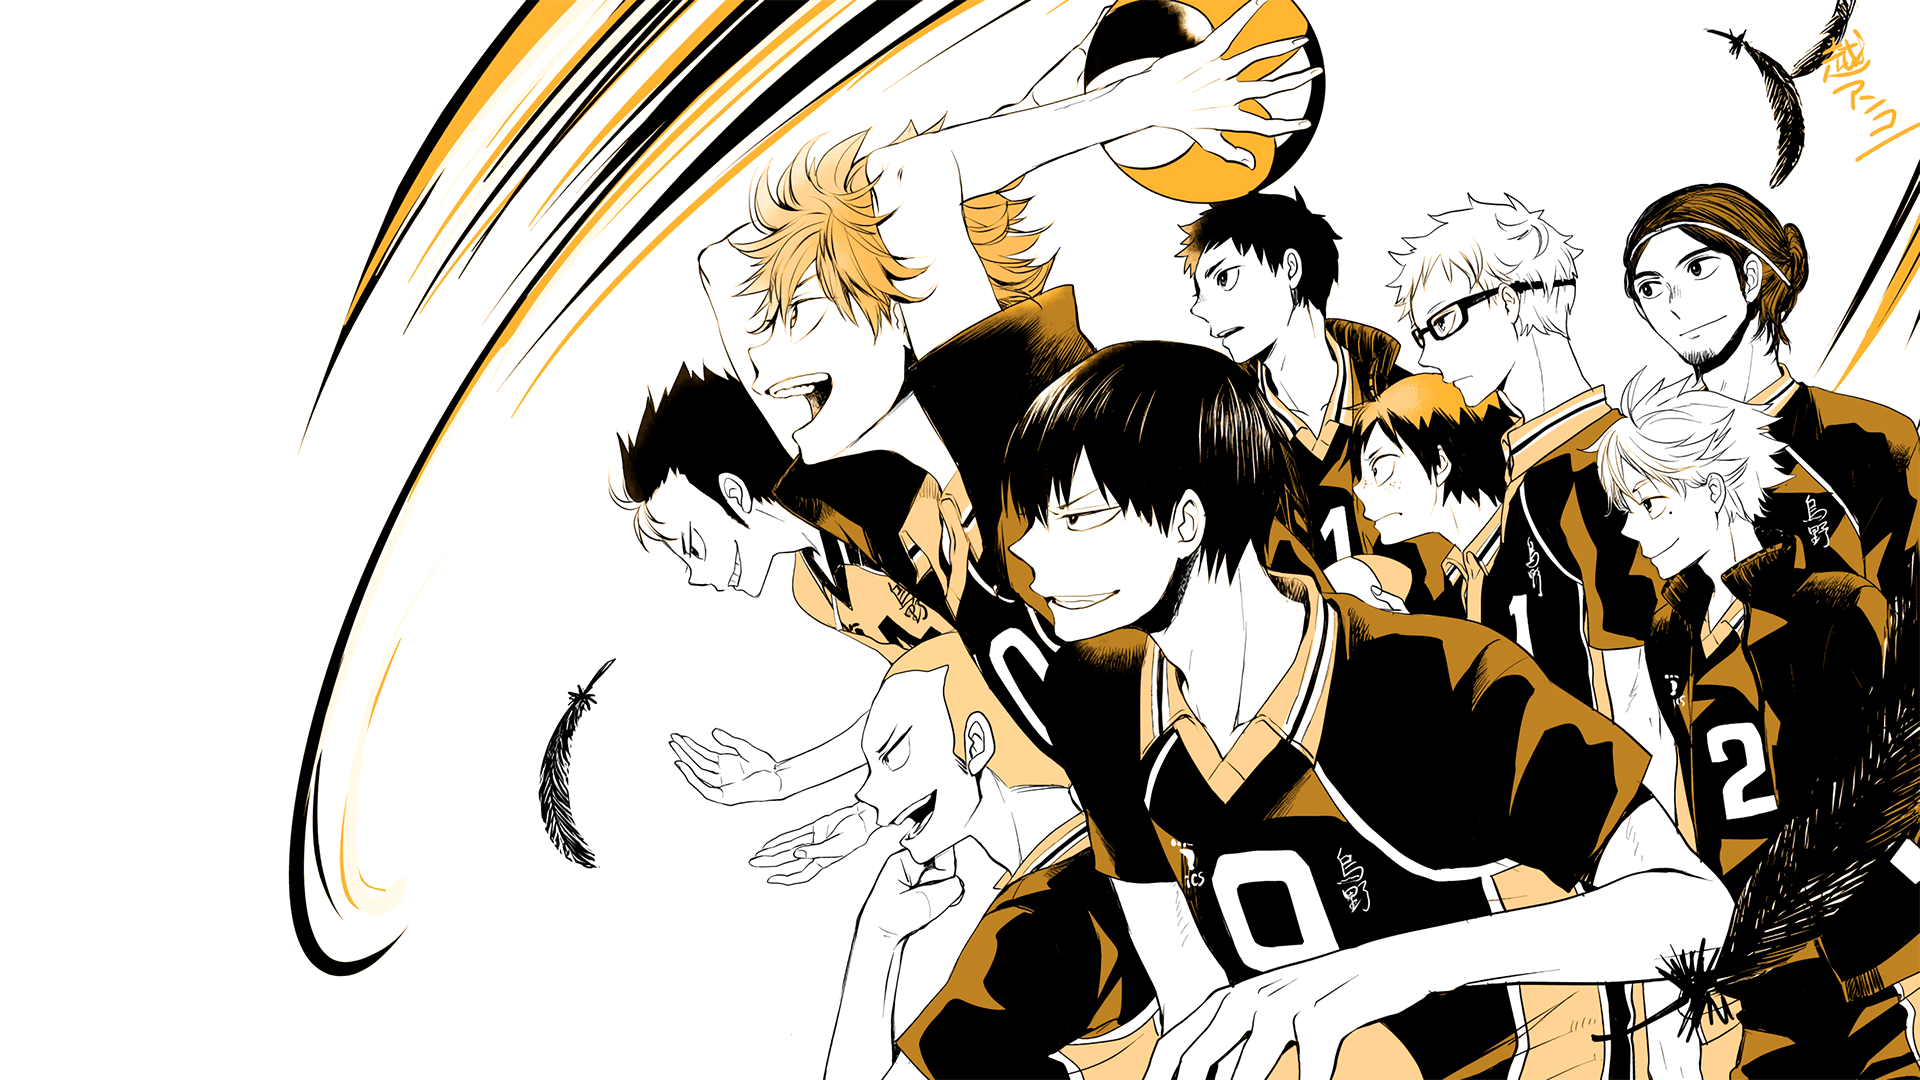 Haikyuu!! Computer Wallpapers, Desk 4K Backgrounds